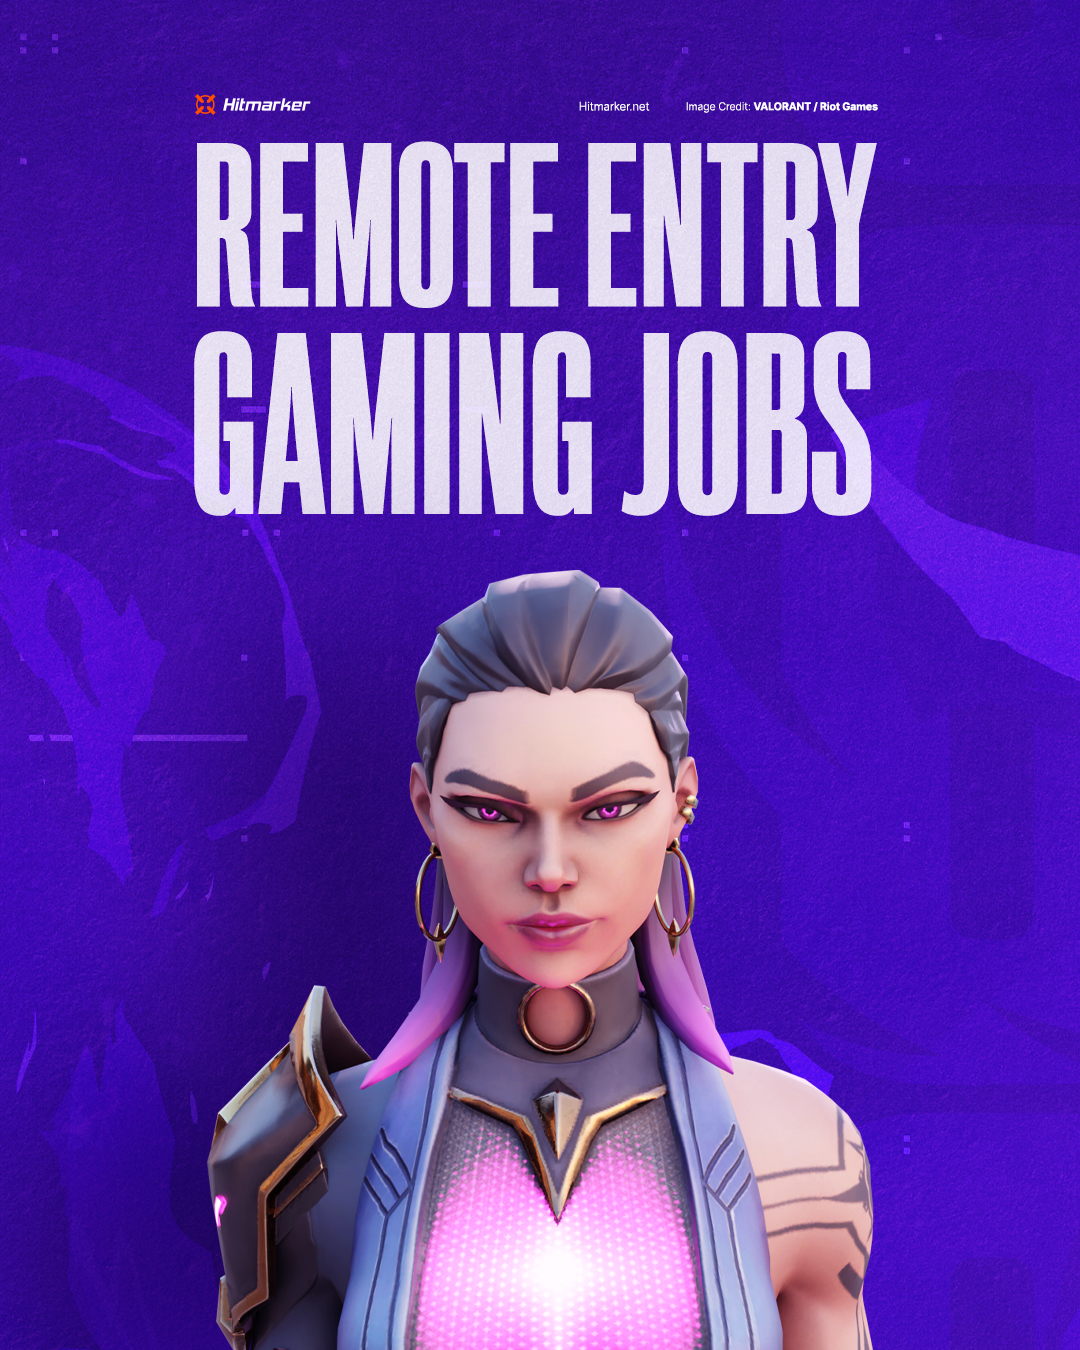 Work from Home Playing VIDEO GAMES, NOW HIRING!!!